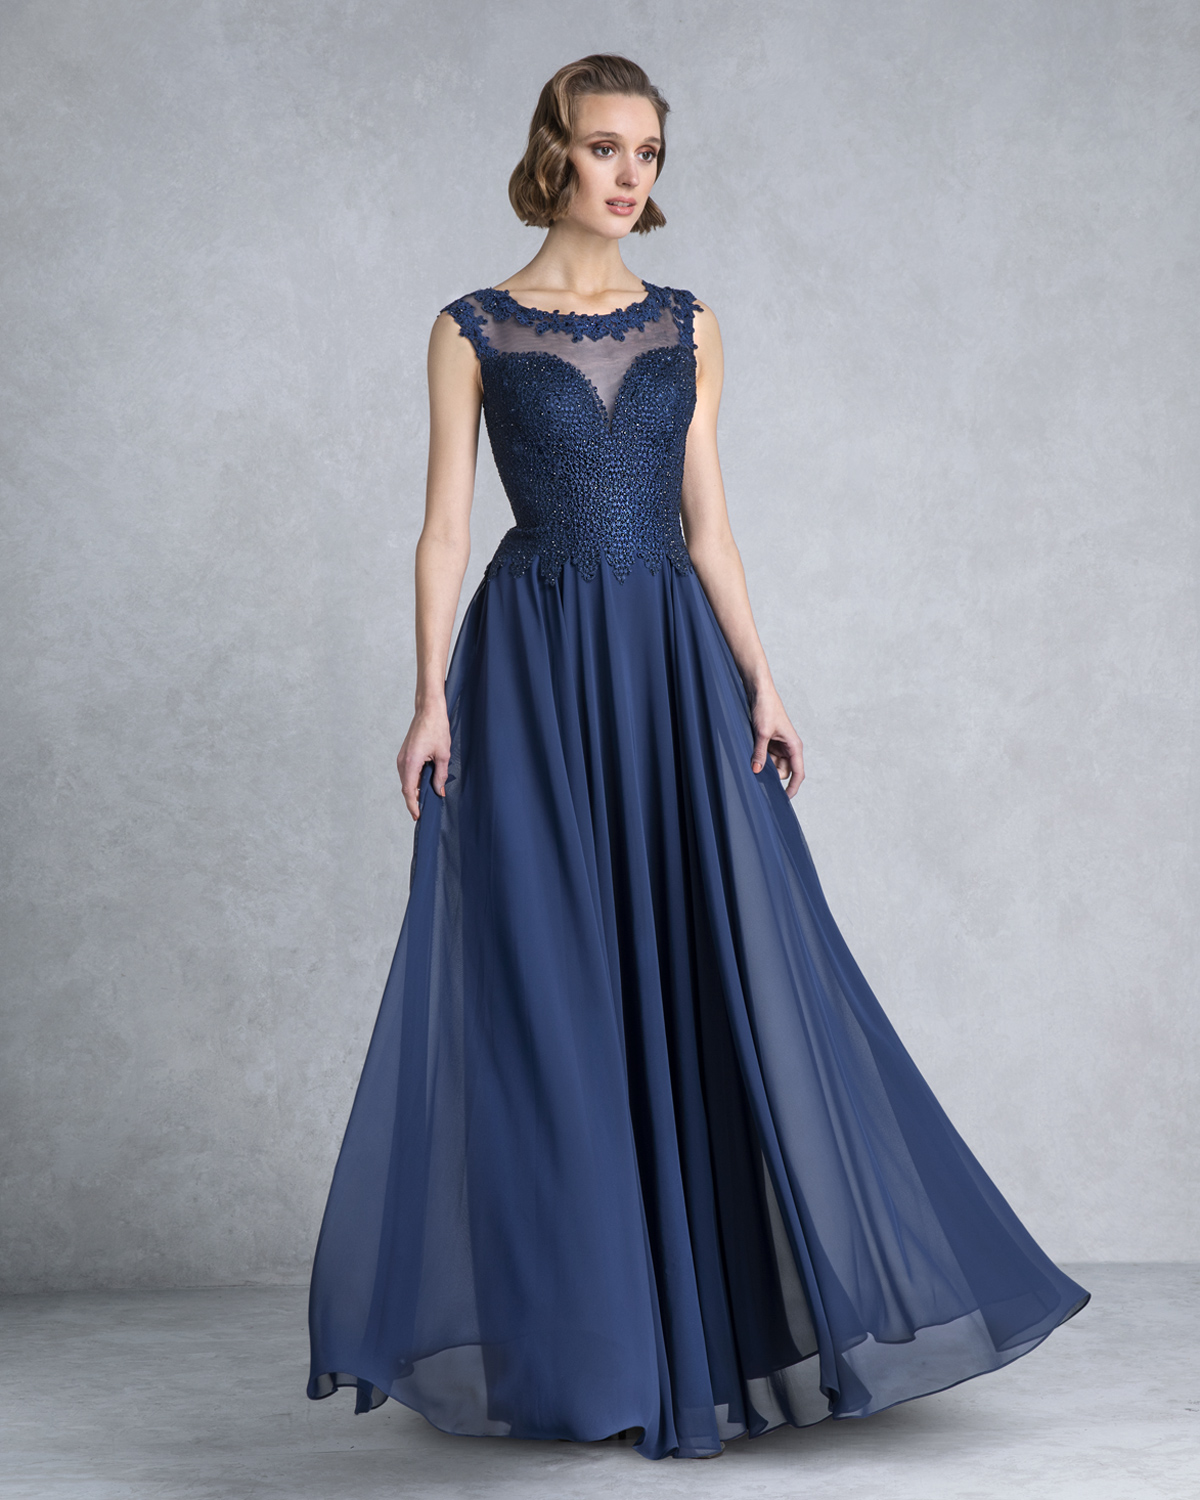 Classic Dresses / Long evening dress with lace beaded top for the mother of the bride